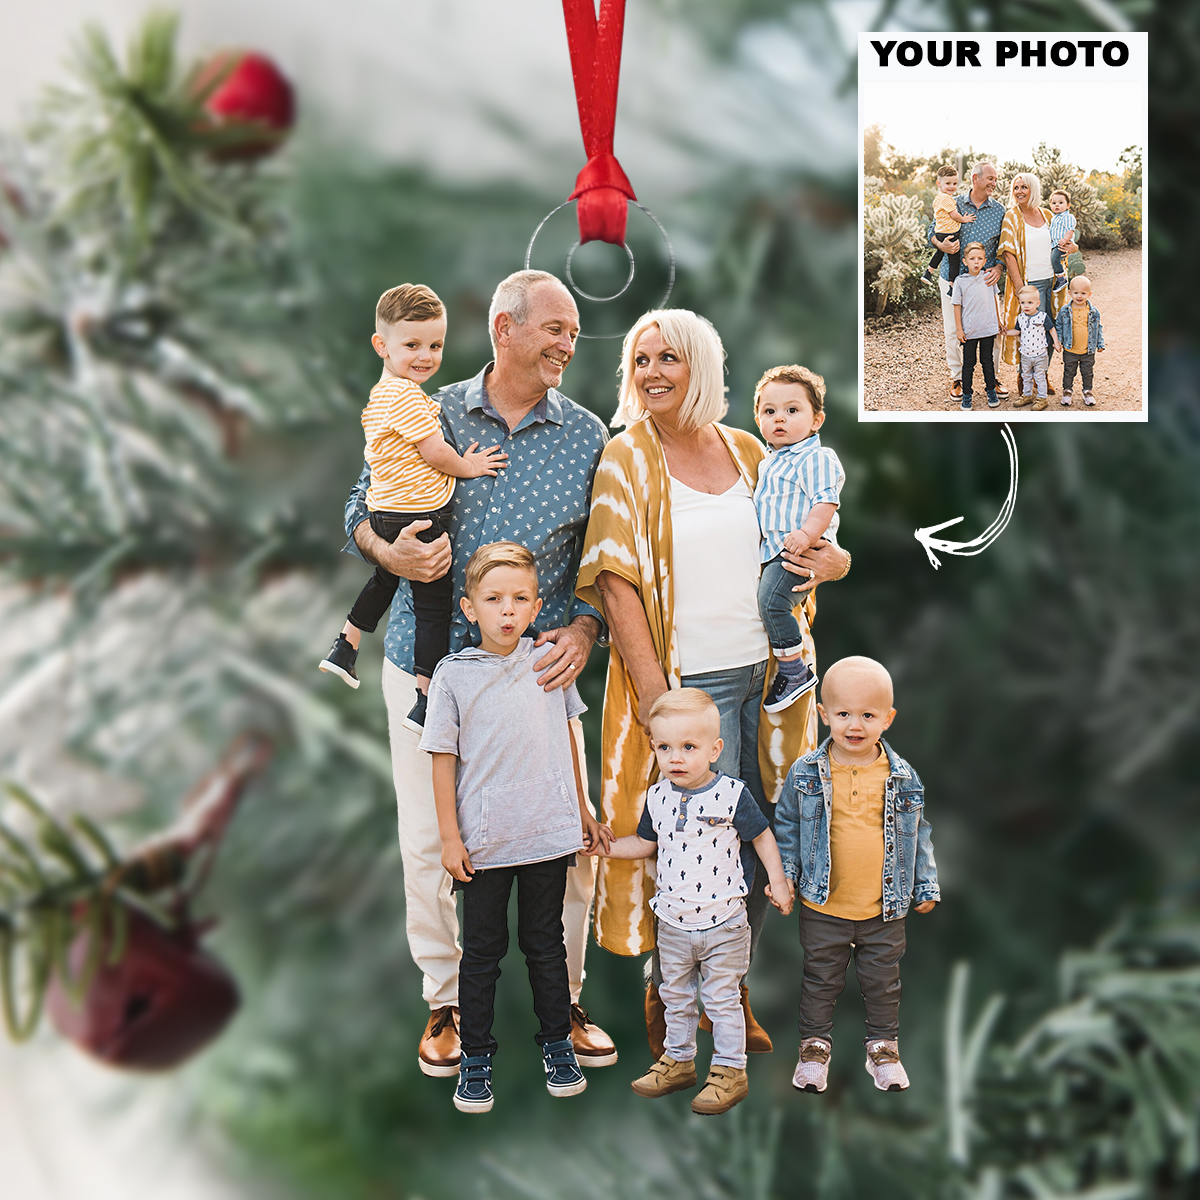 Our Grandkids - Personalized Photo Mica Ornament - Customized Your Photo Ornament - Christmas Gift For Grandma, Grandpa, Family Members